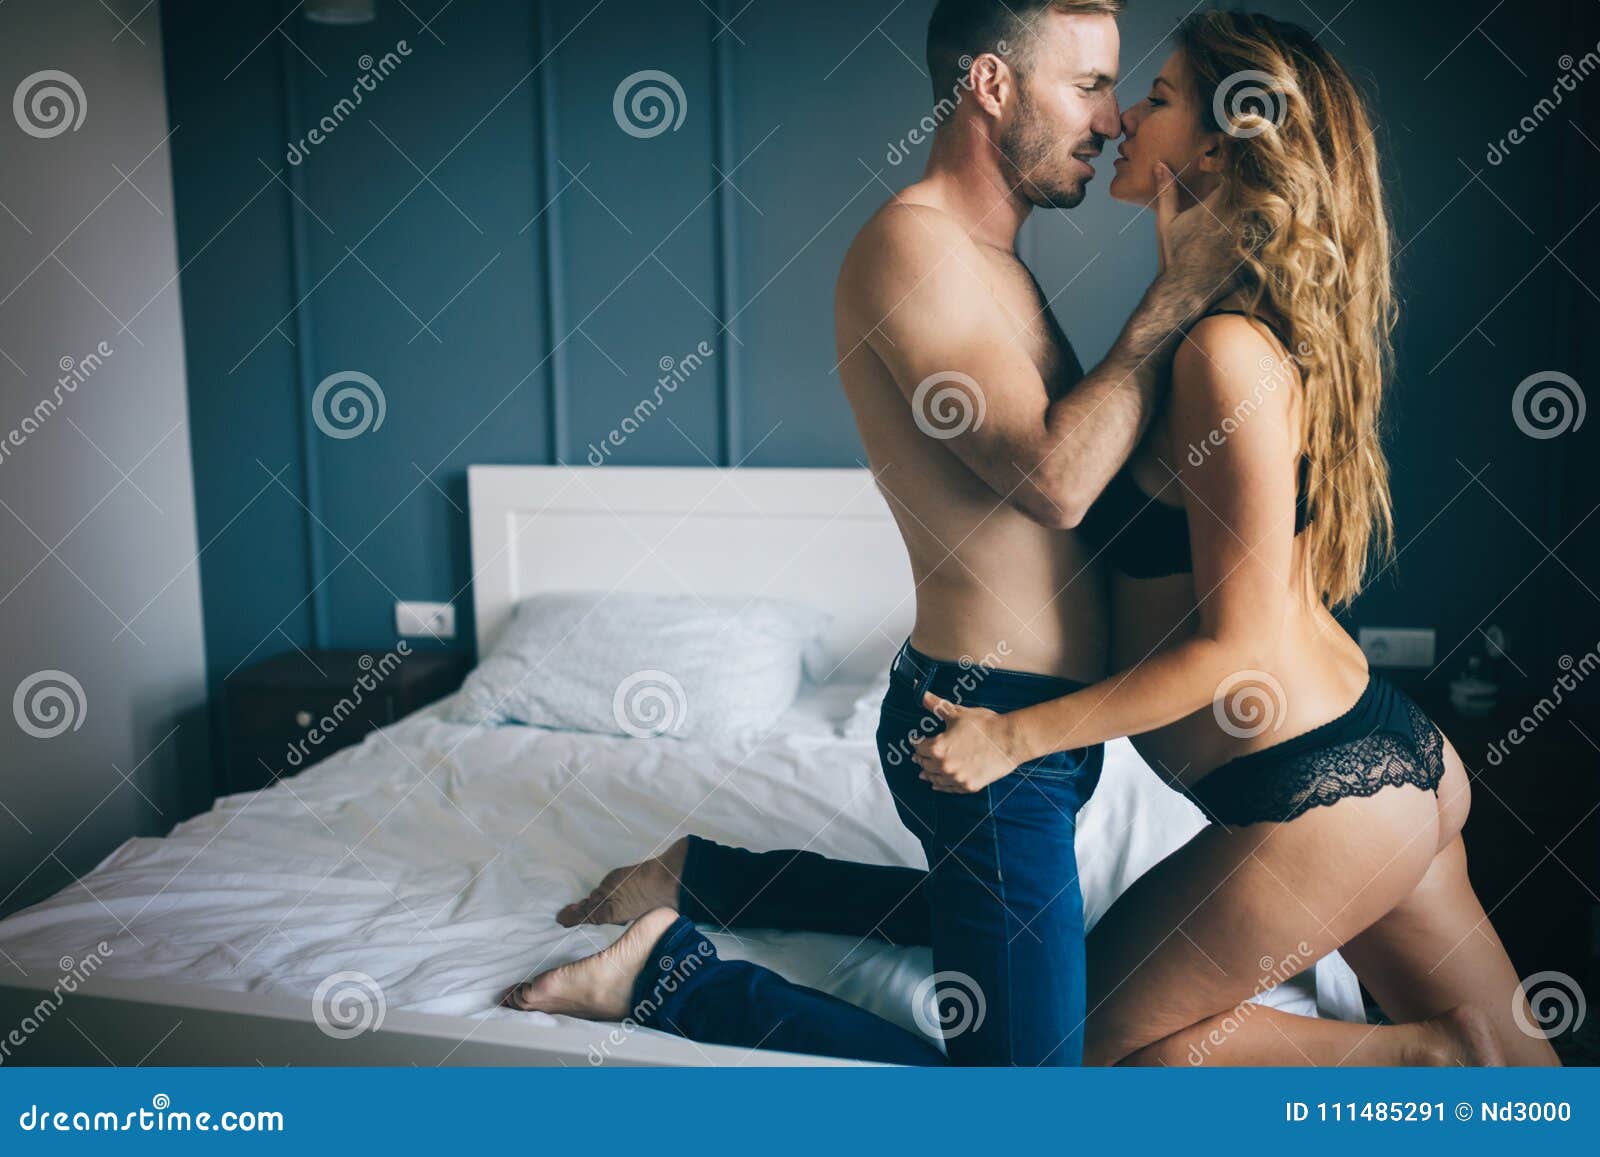 Back View of Woman in Black Panties Holding Her Bra while Man is Lying on Bed Stock Image